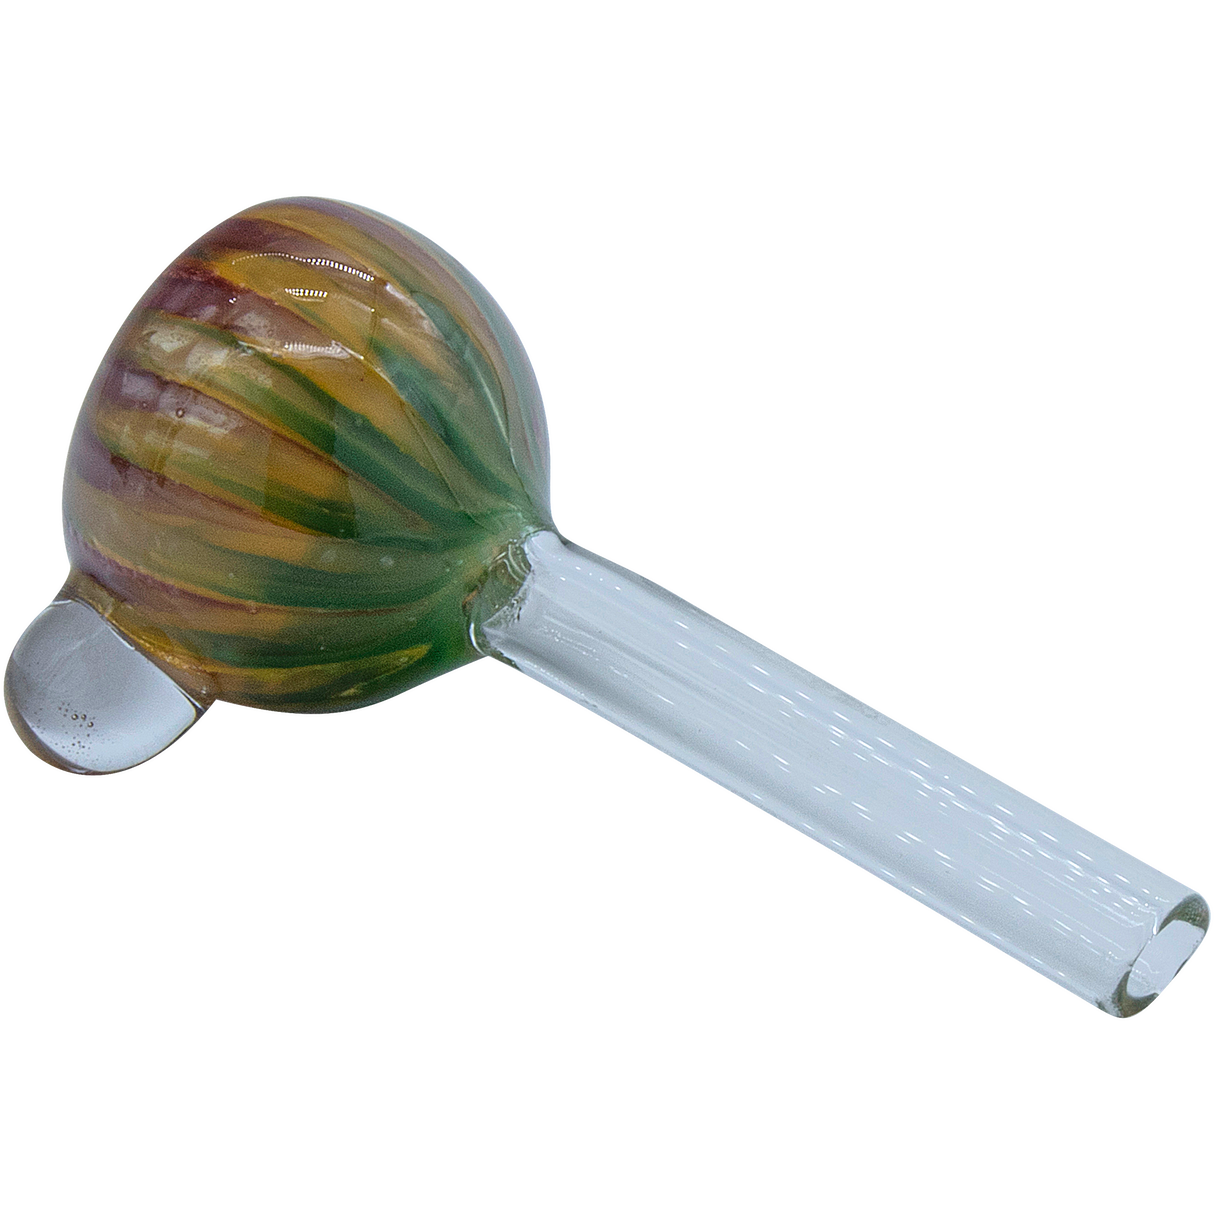 LA Pipes 9mm Rasta Slide Bowl for Bongs with Grommet Joint, Borosilicate Glass, Top View